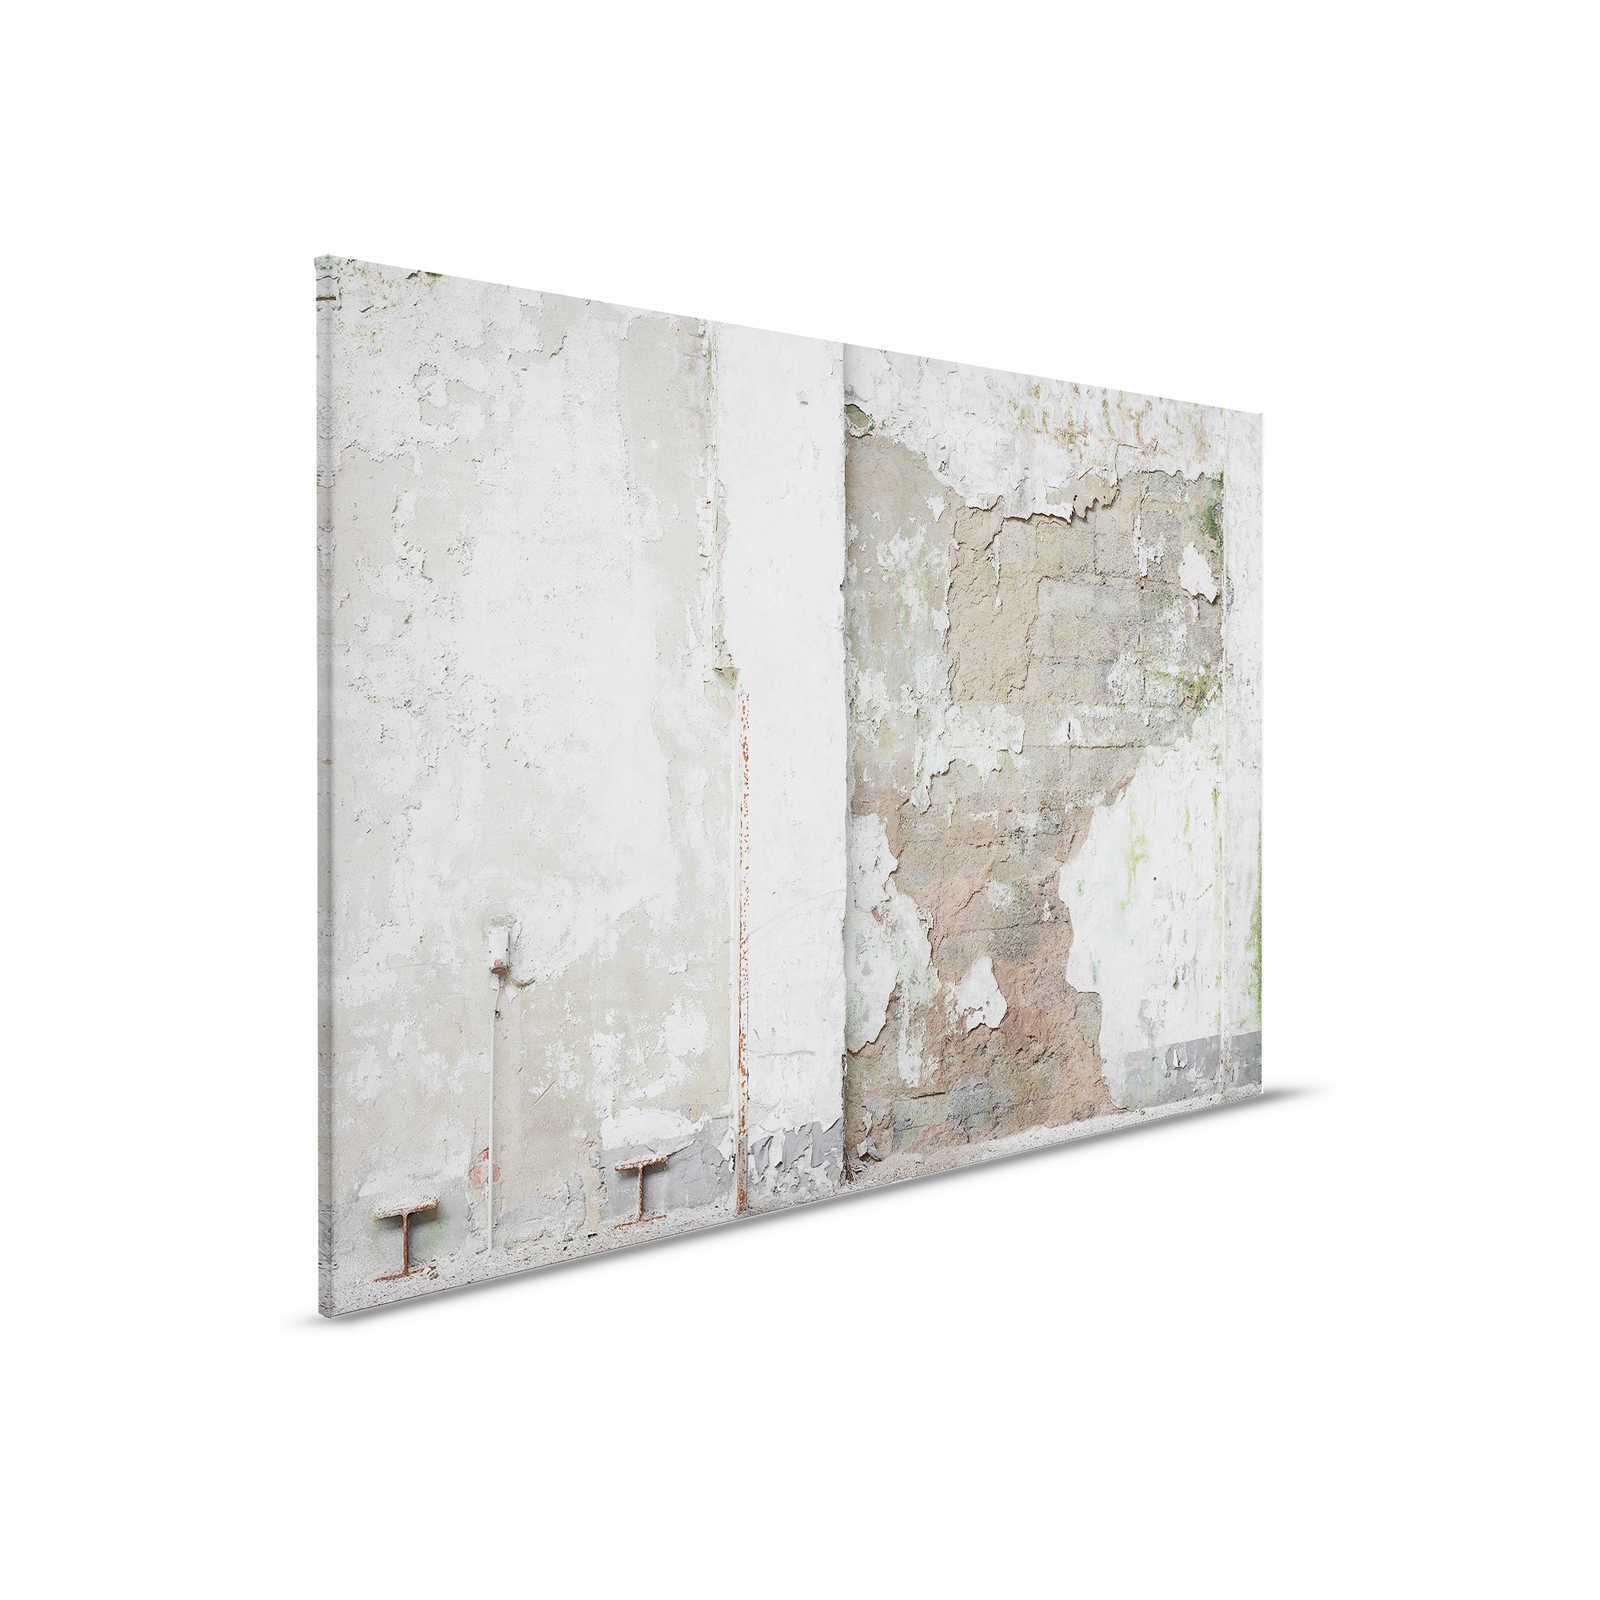         Concrete Used Look Canvas Painting - 0.90 m x 0.60 m
    